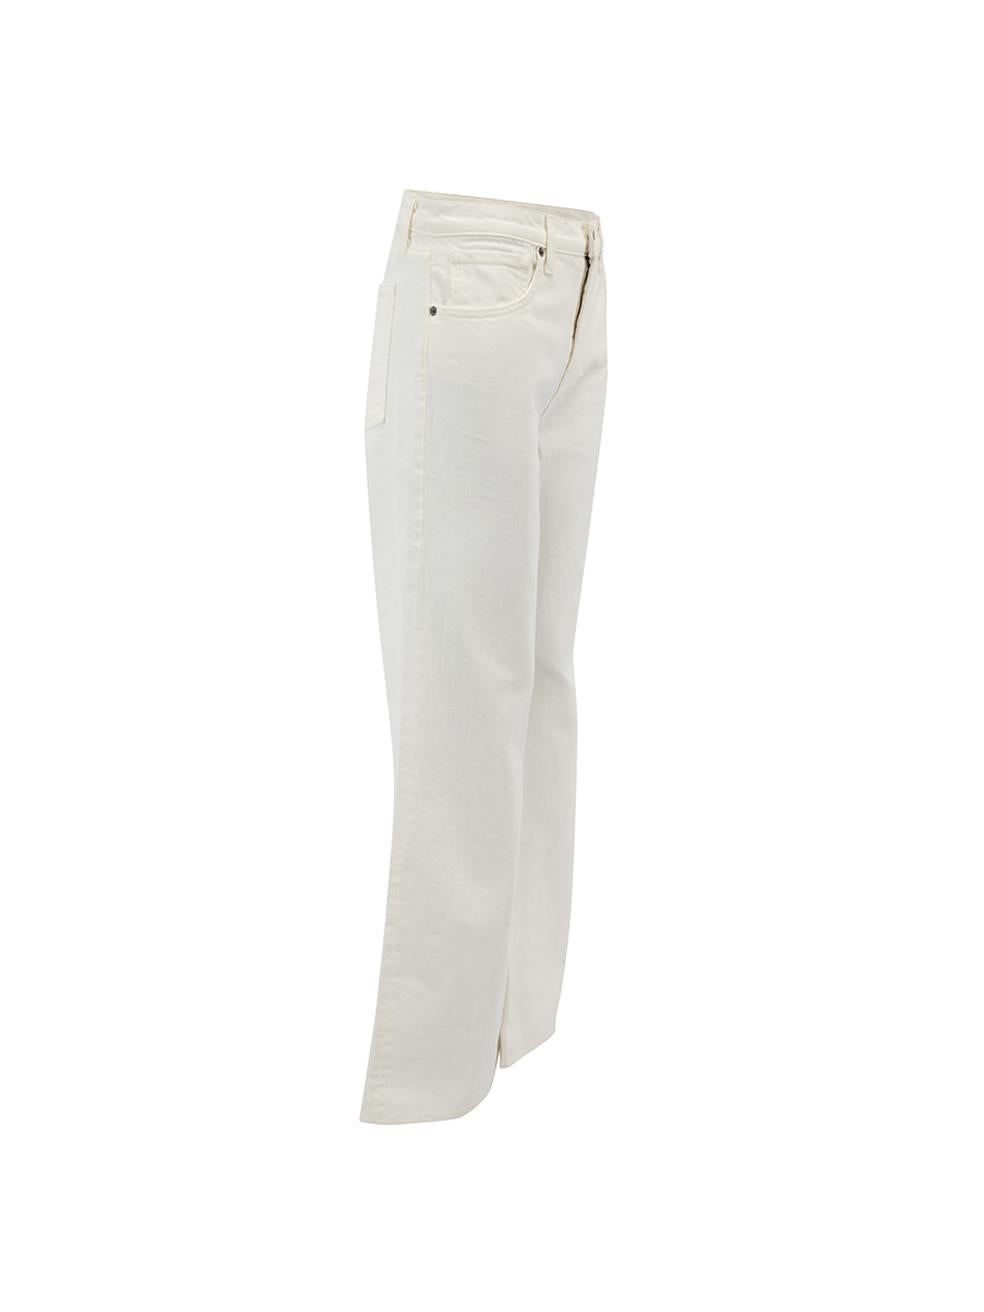 CONDITION is Never Worn. No visible wear to jeans is evident on this used Nili Lotan designer resale item. 
 
 Details
  Cream
 Denim
 Wide leg trousers
 Mid rise
 Front zip closure with button
 Front side pockets
 Back patch pockets
 Belt hoops
 
